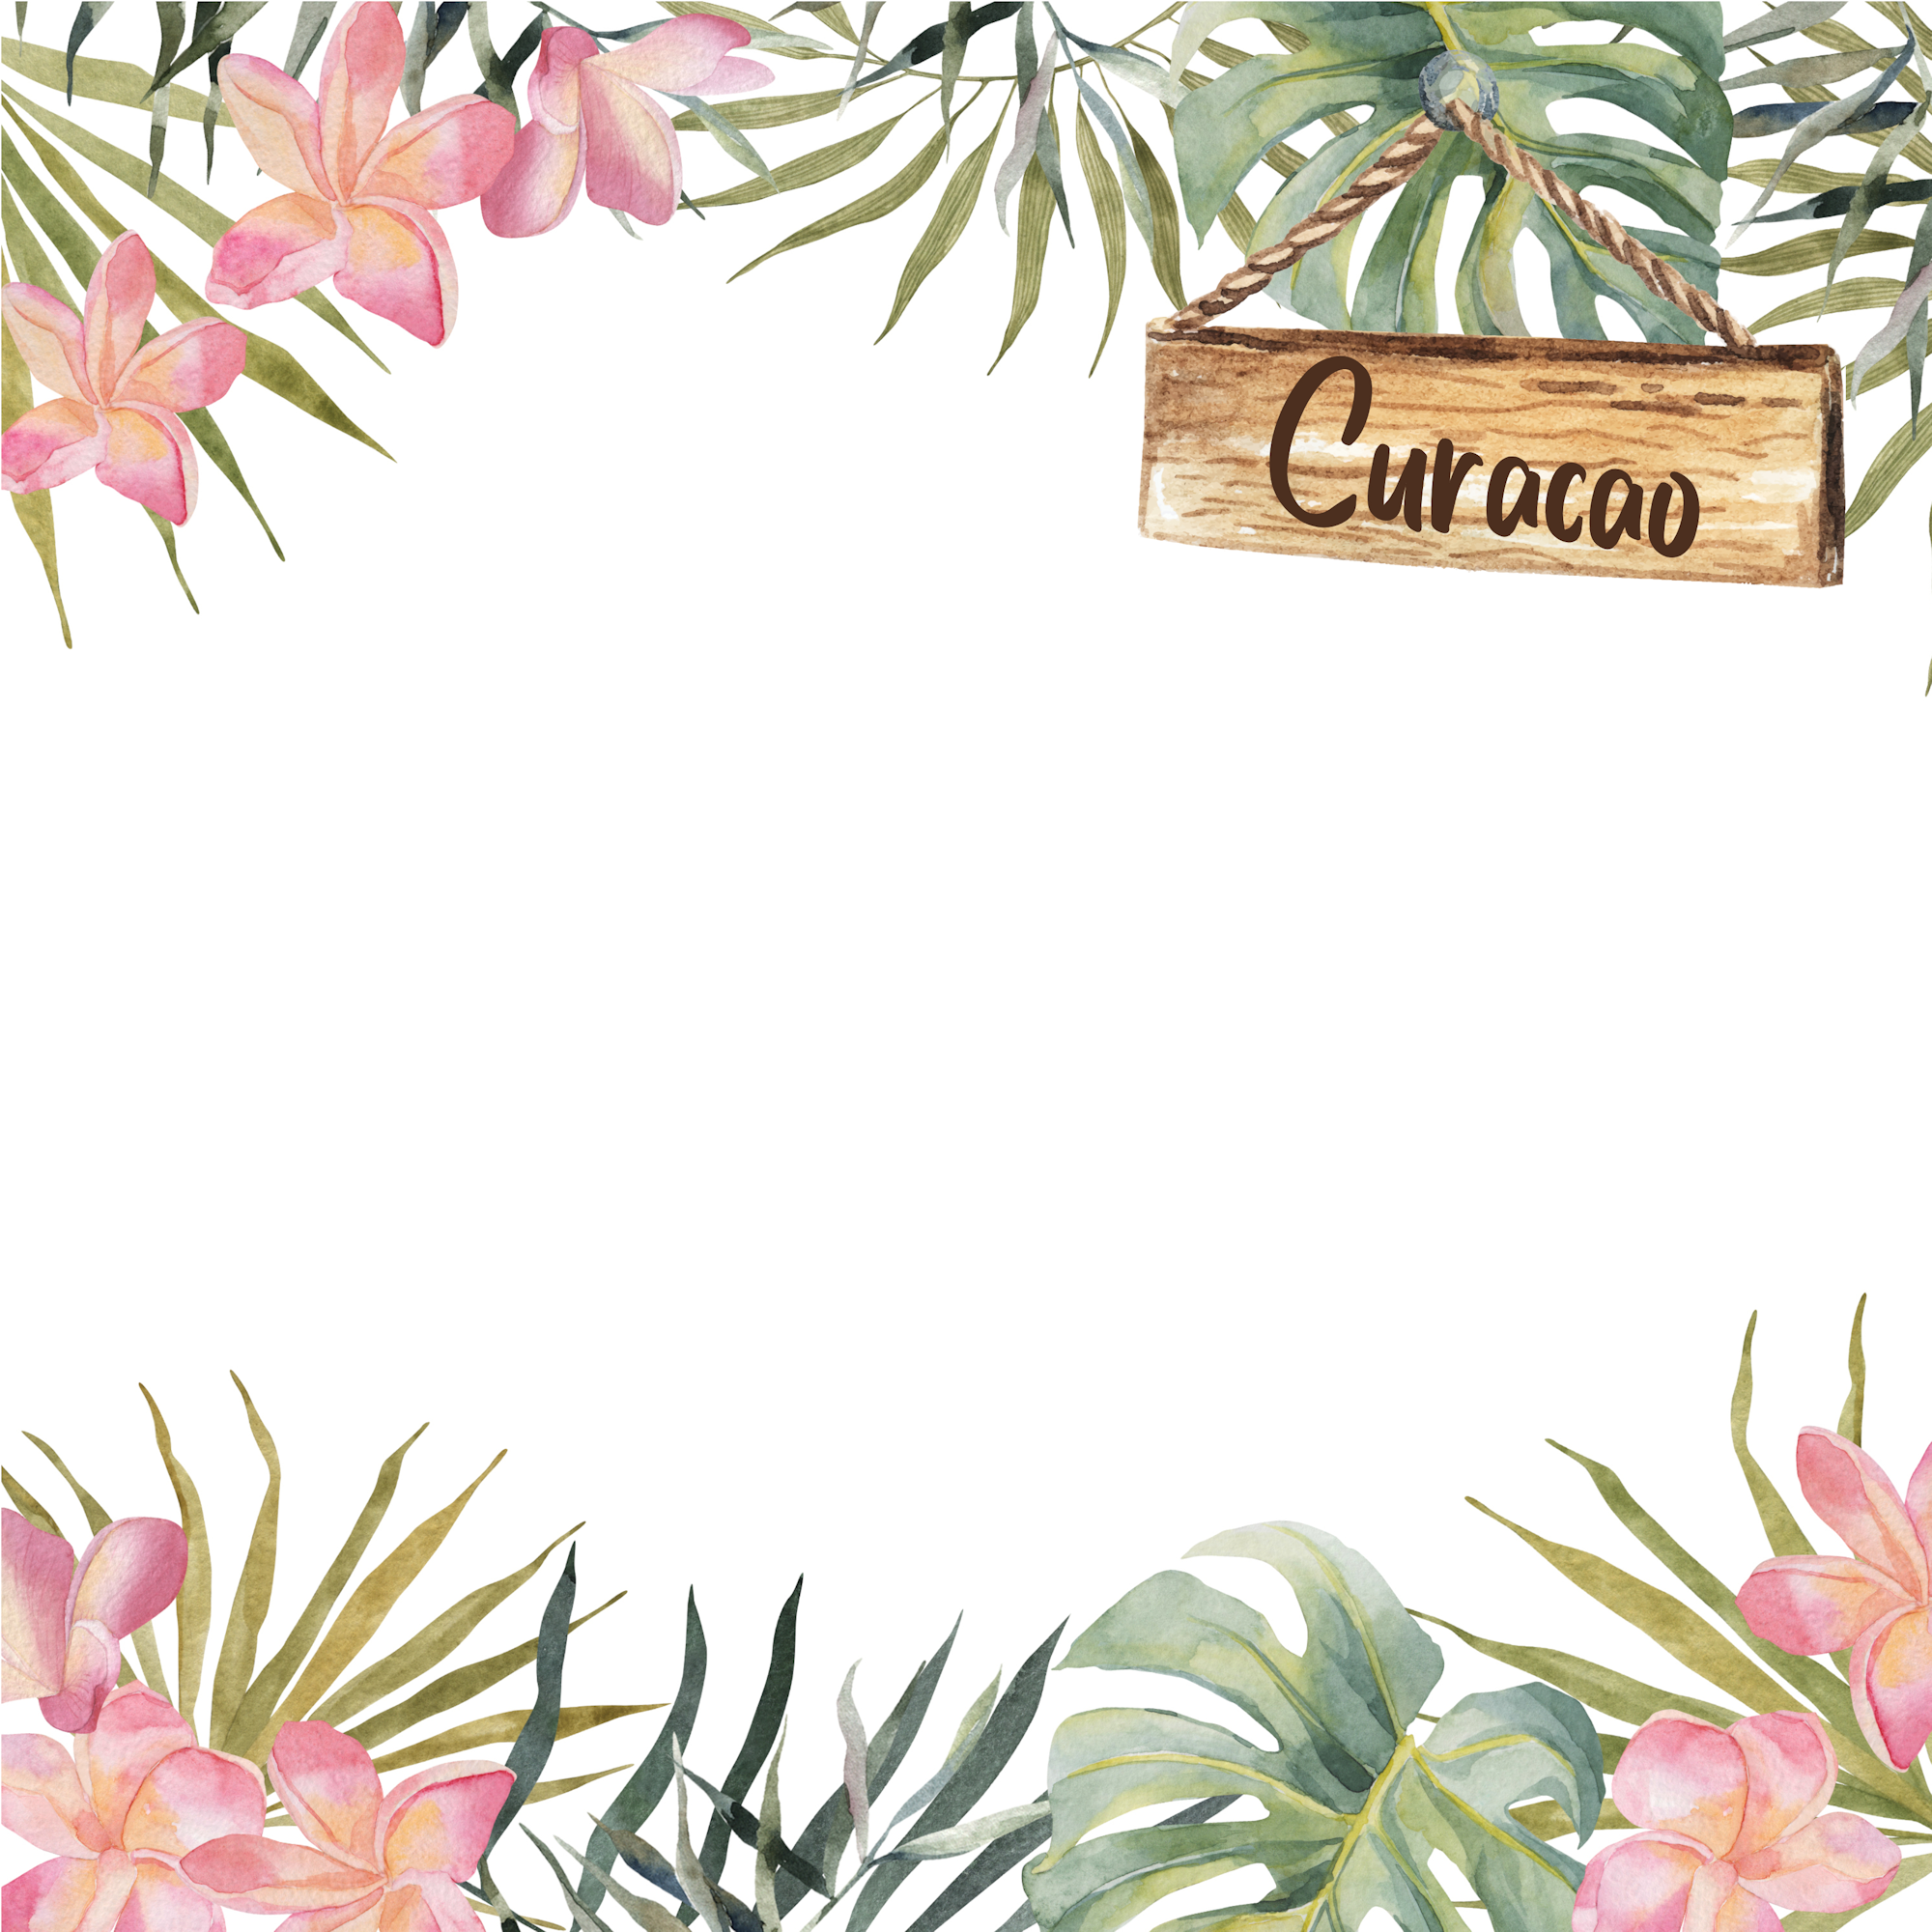 Tropical Paradise Collection Curacao 12 x 12 Double-Sided Scrapbook Paper by SSC Designs